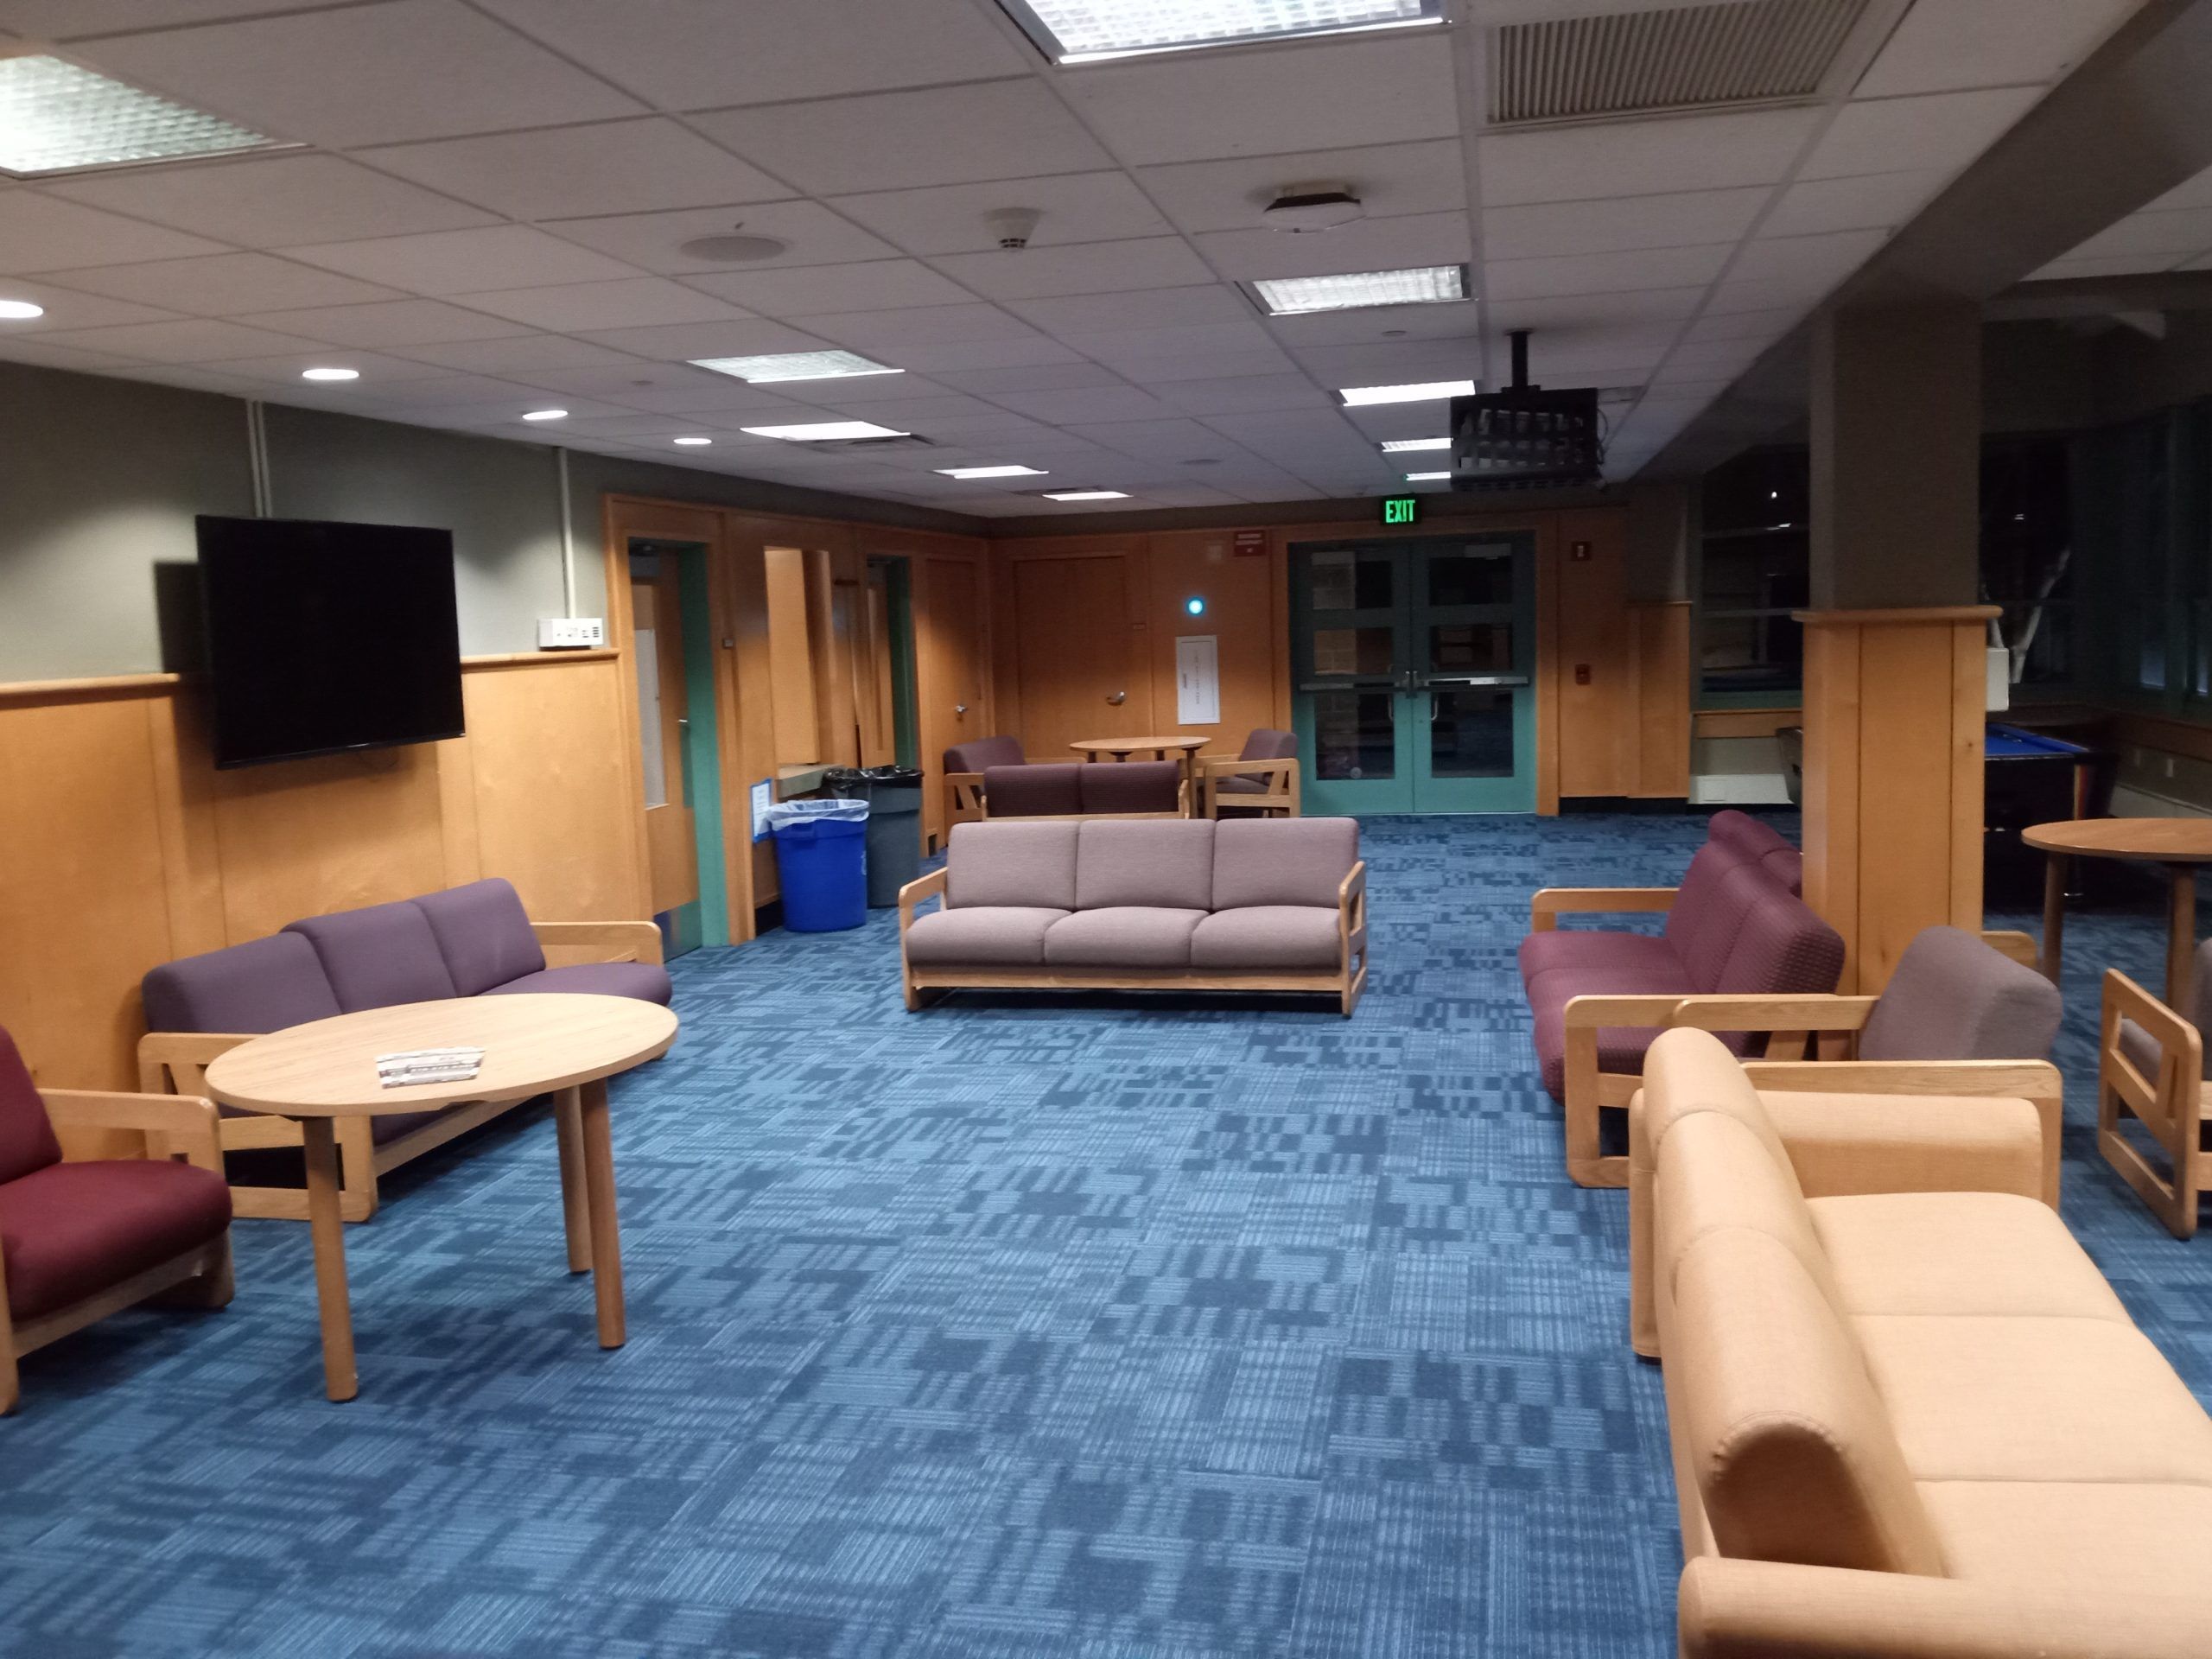 Lounge in residence hall